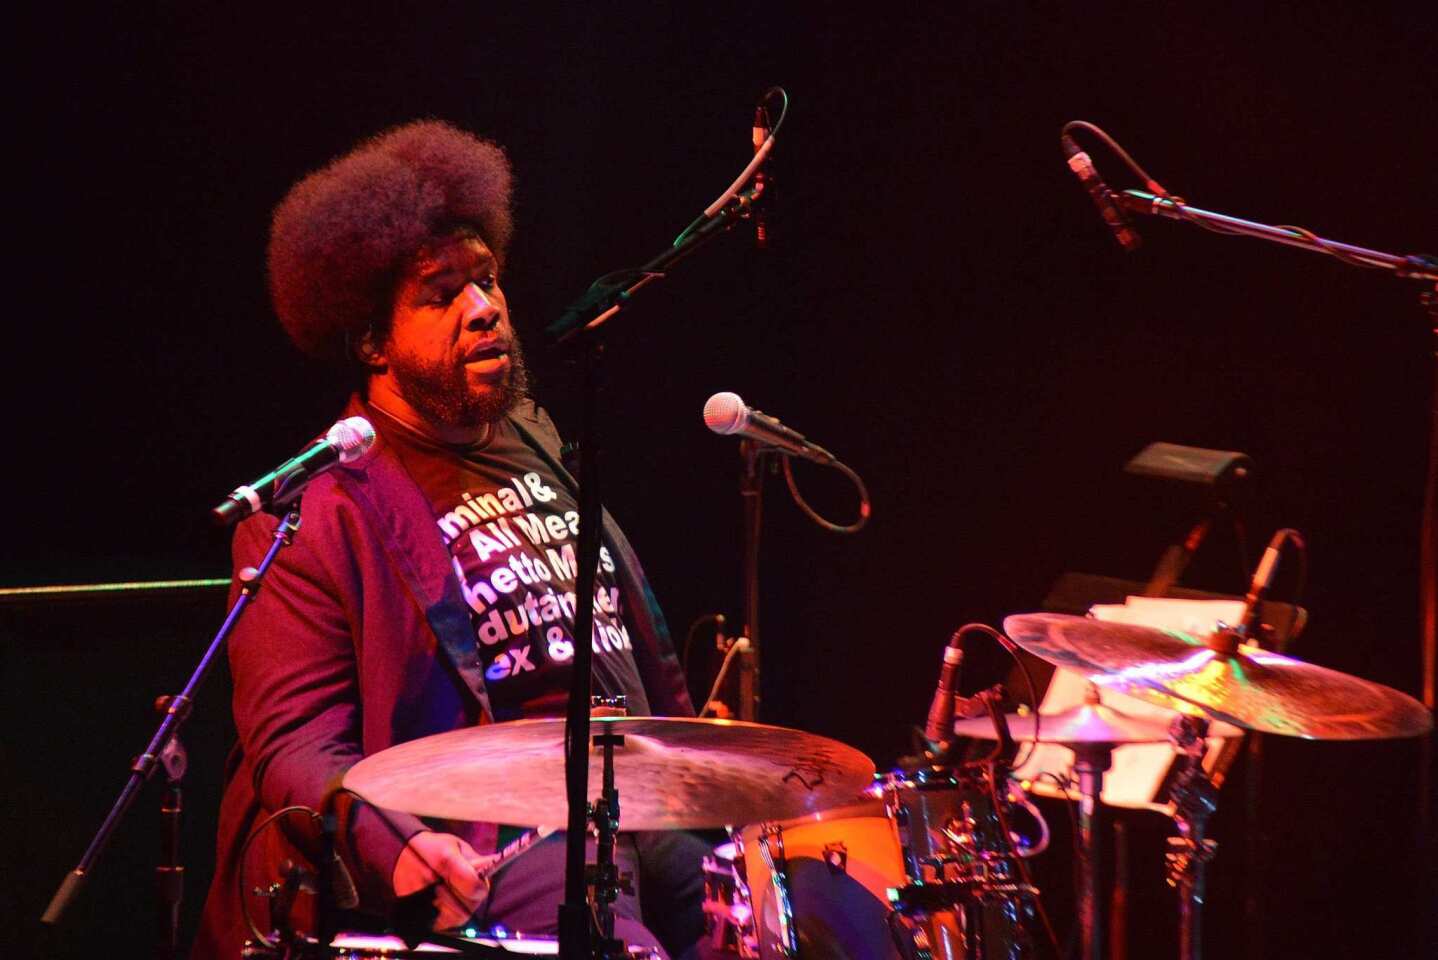 Questlove of The Roots